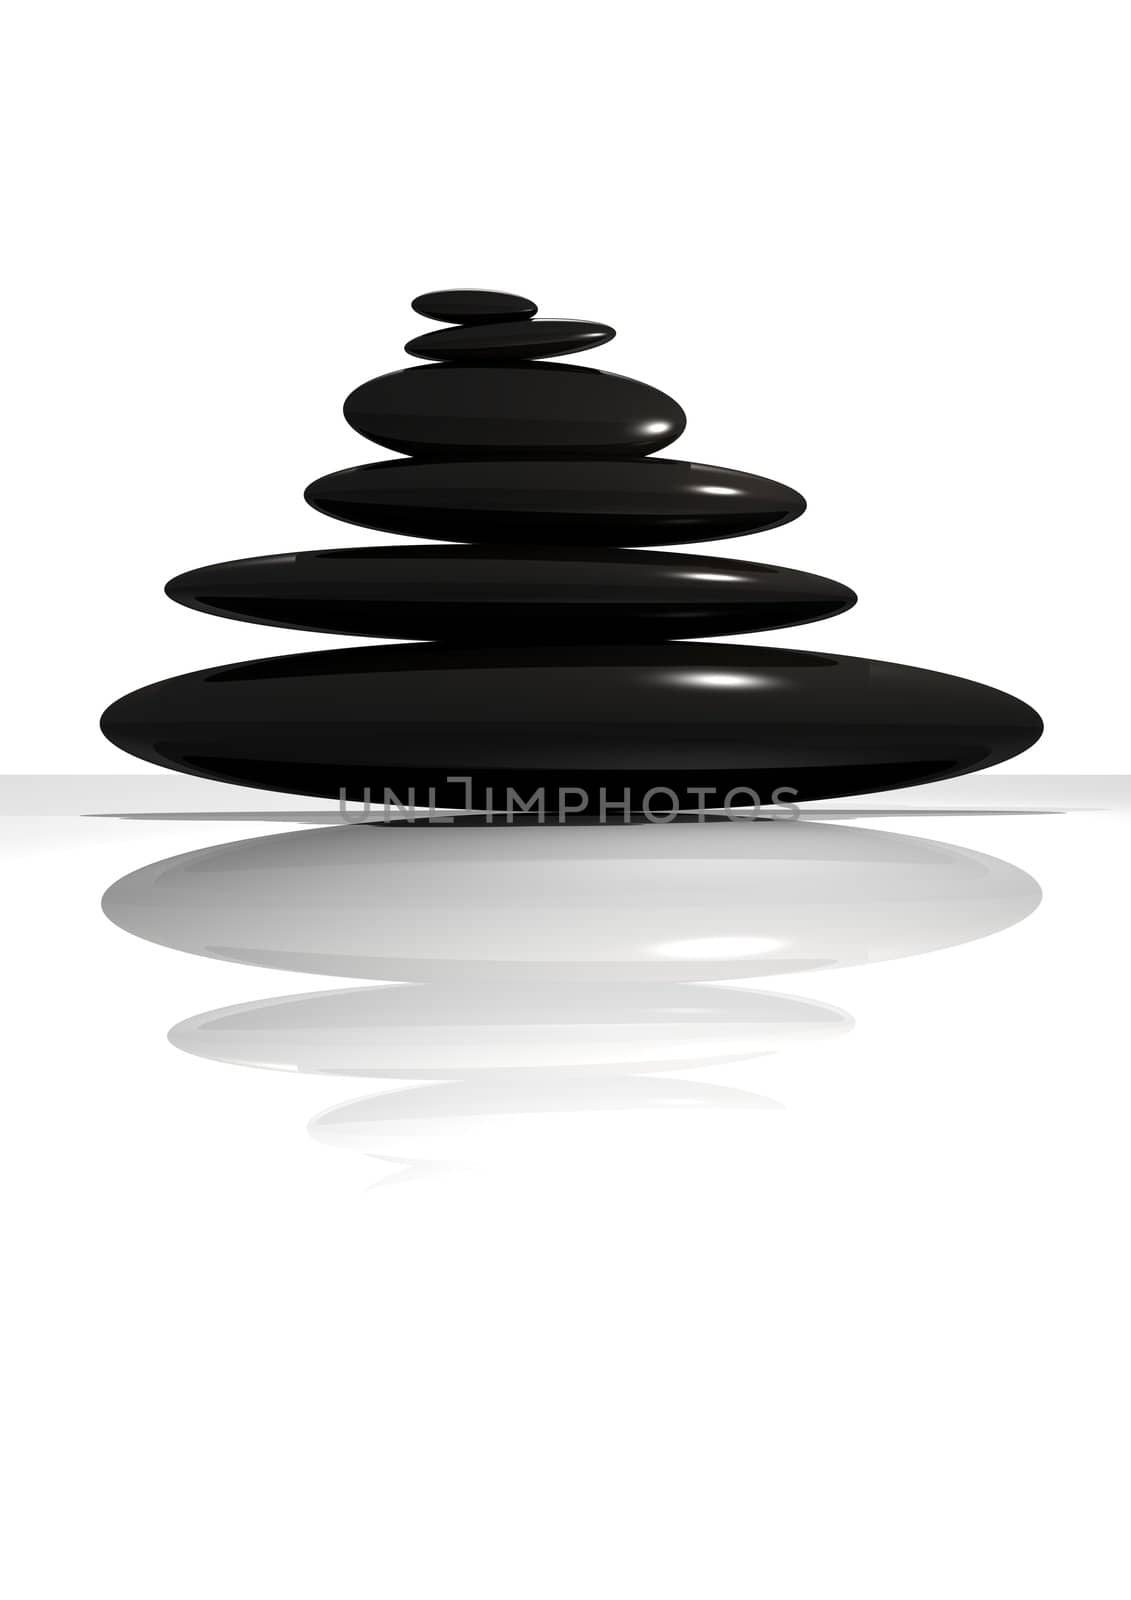 Several balanced black stones ant its grey reflection in a white background